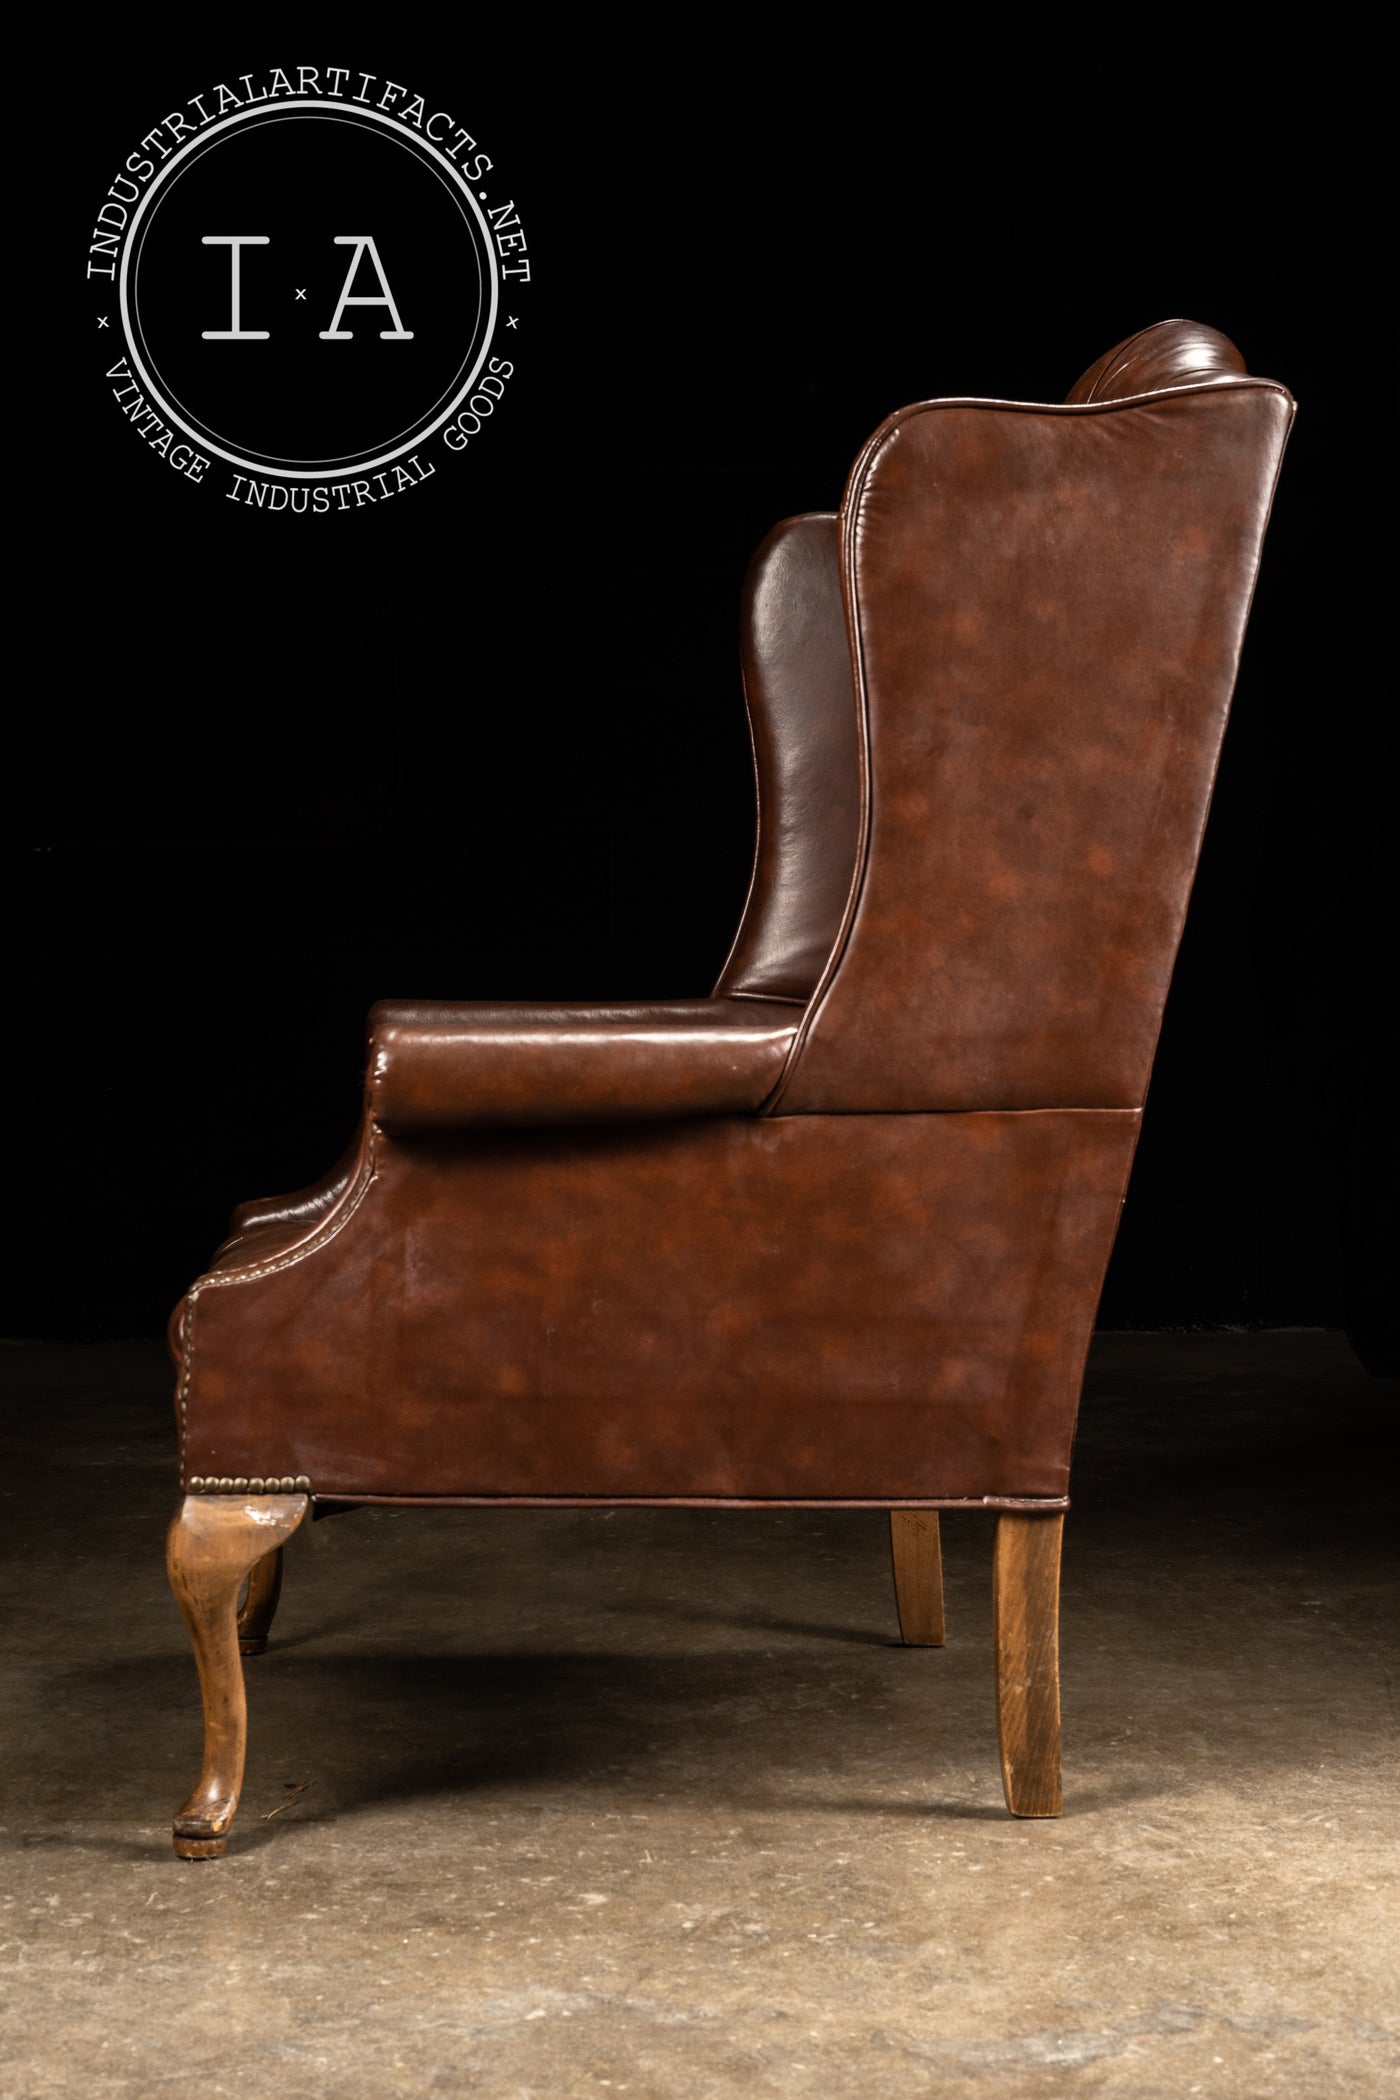 Vintage Wingback Tufted Leather Chair in Brown